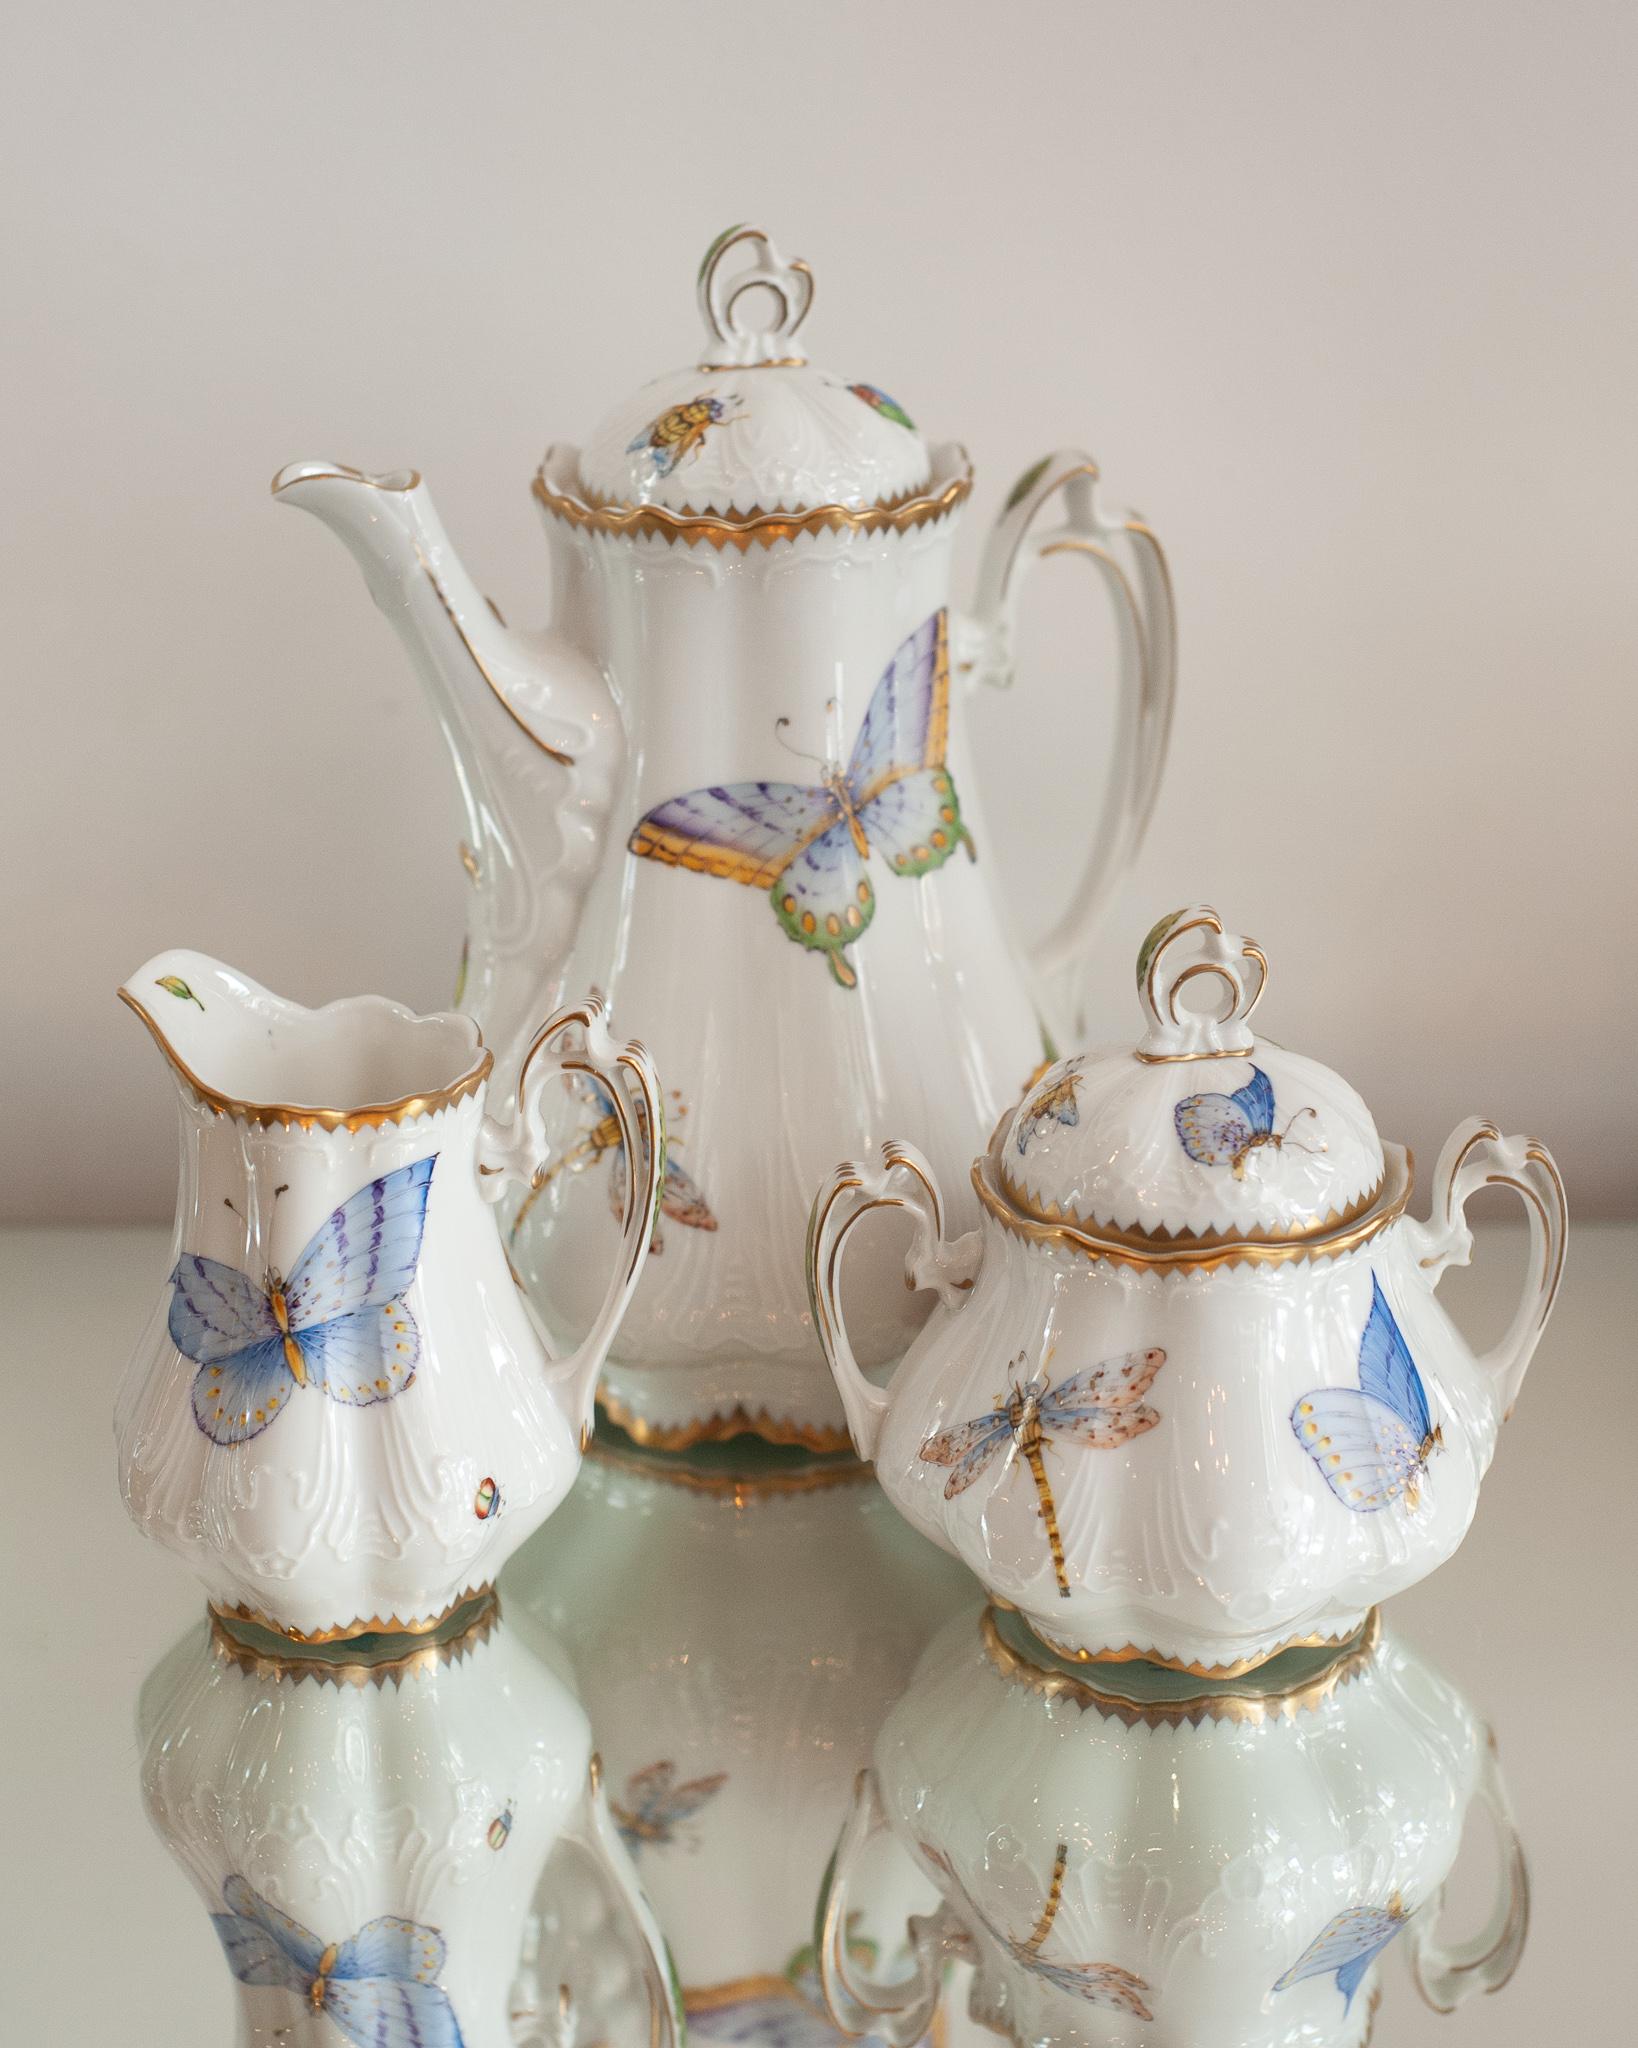 A gorgeous three piece Coffee/Tea set, hand painted with butterflies by Anna Weatherley Designs. Anna Weatherley has been designing and producing Fine Botanical Hand Painted Porcelain in Hungary for 30 years.

Teapot measures 10